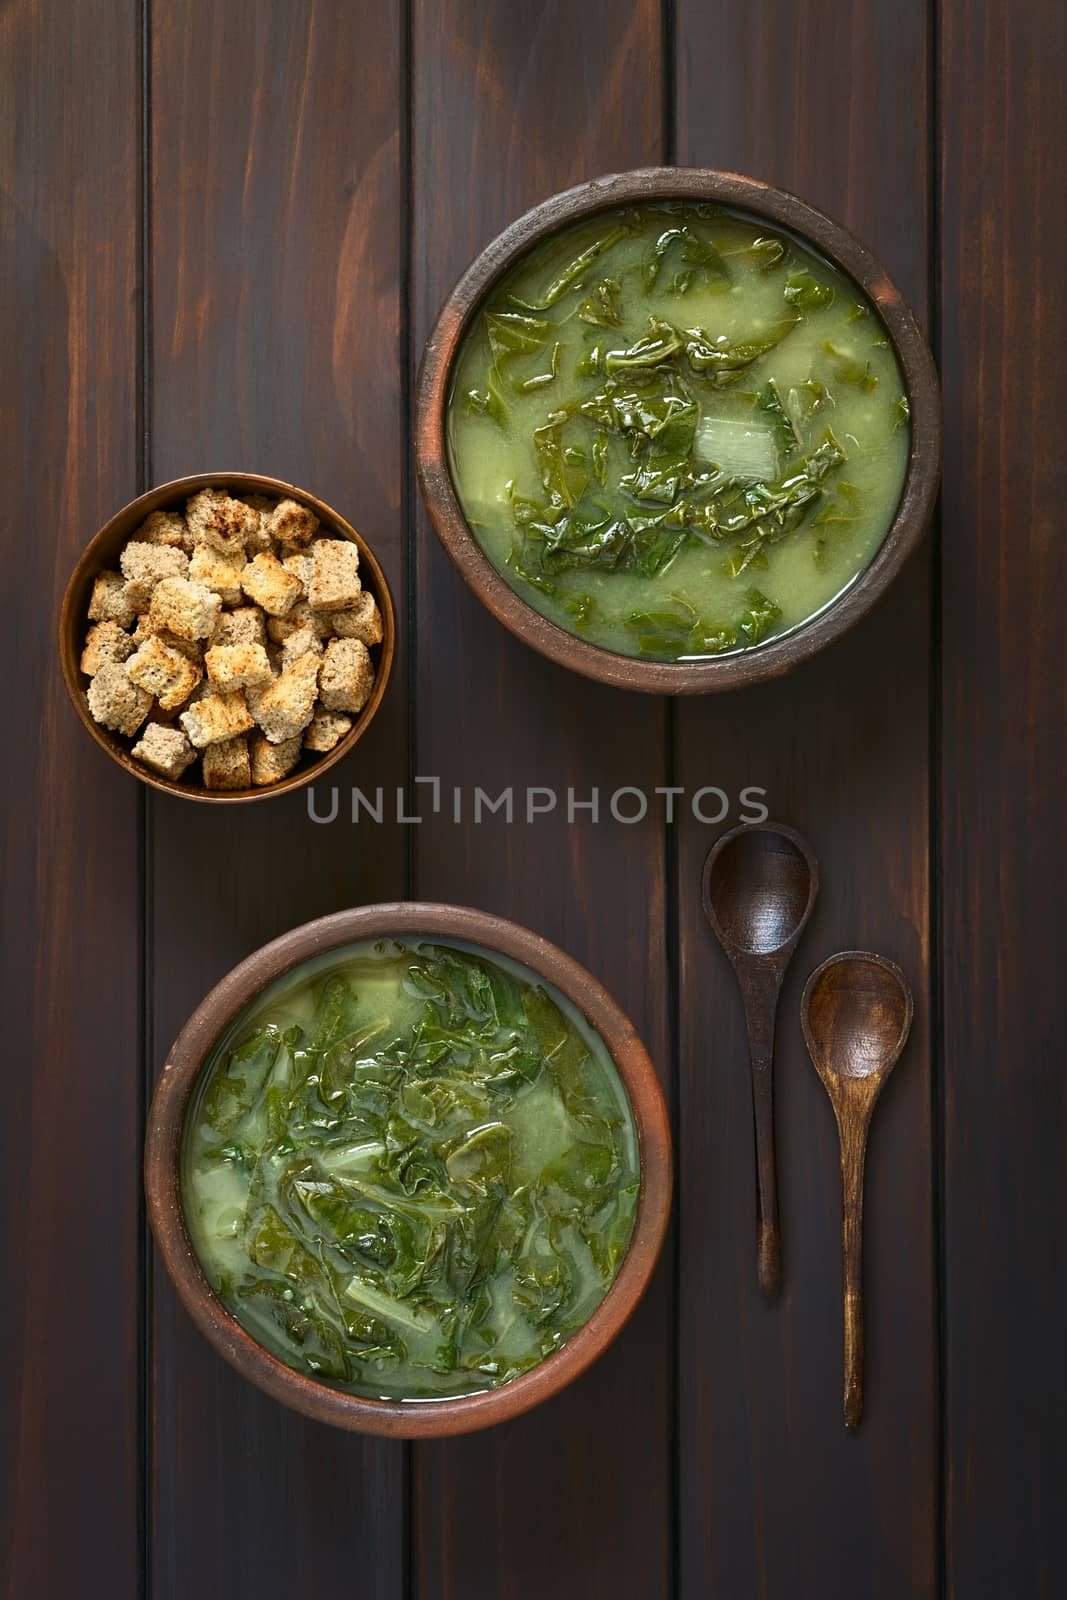 Overhead shot of two rustic bowls of chard soup and a small bowl of croutons with two wooden spoons, photographed on dark wood with natural light